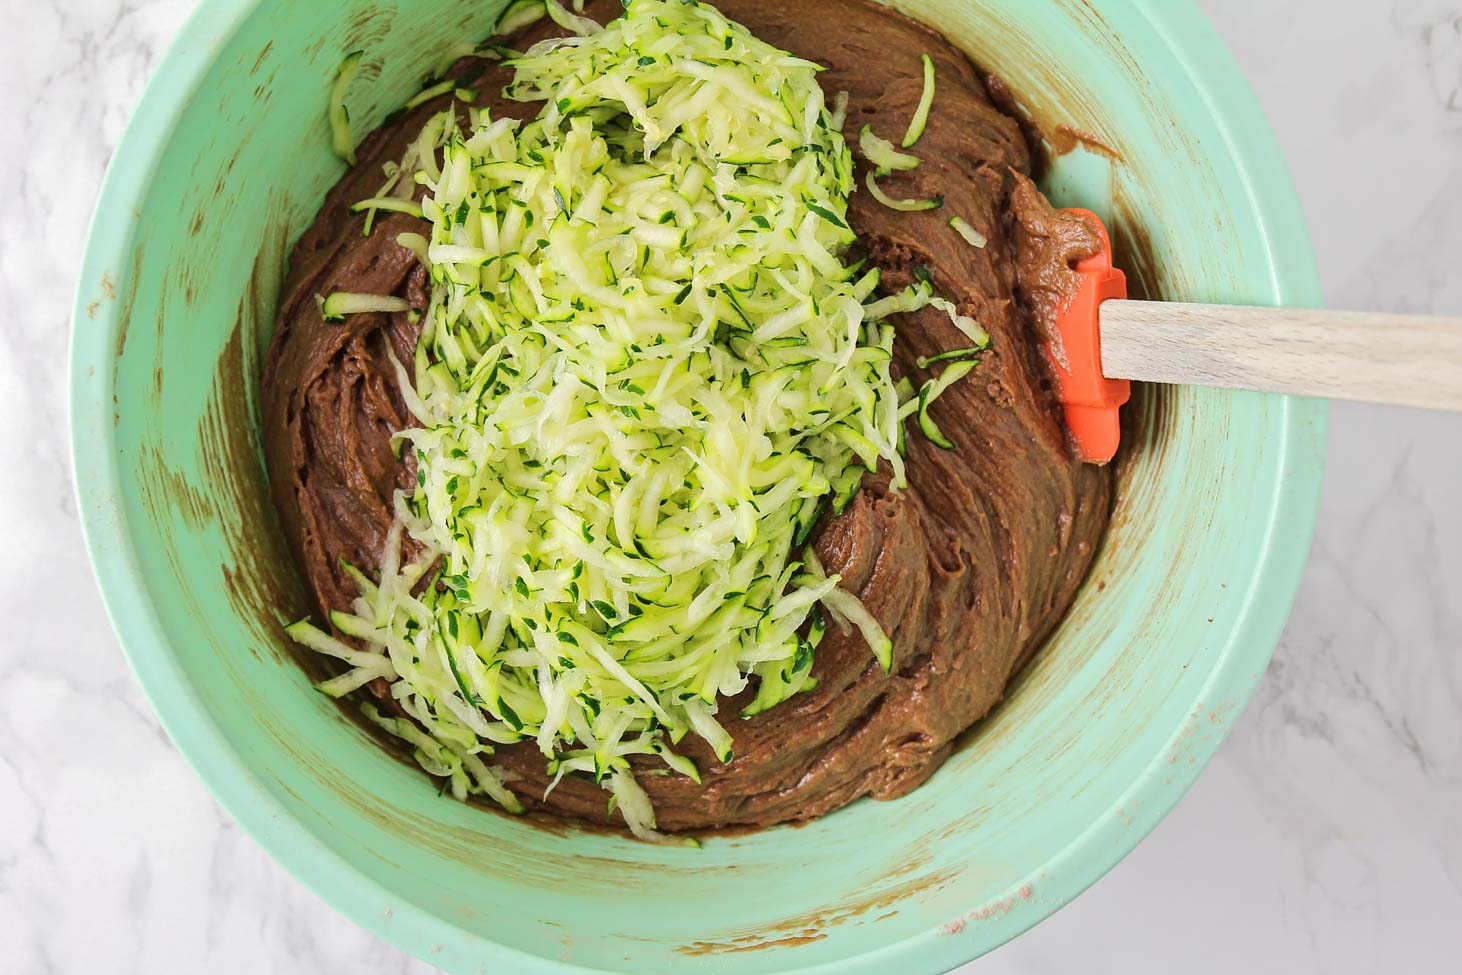 Adding grated zucchini to chocolate batter in a mint bowl.